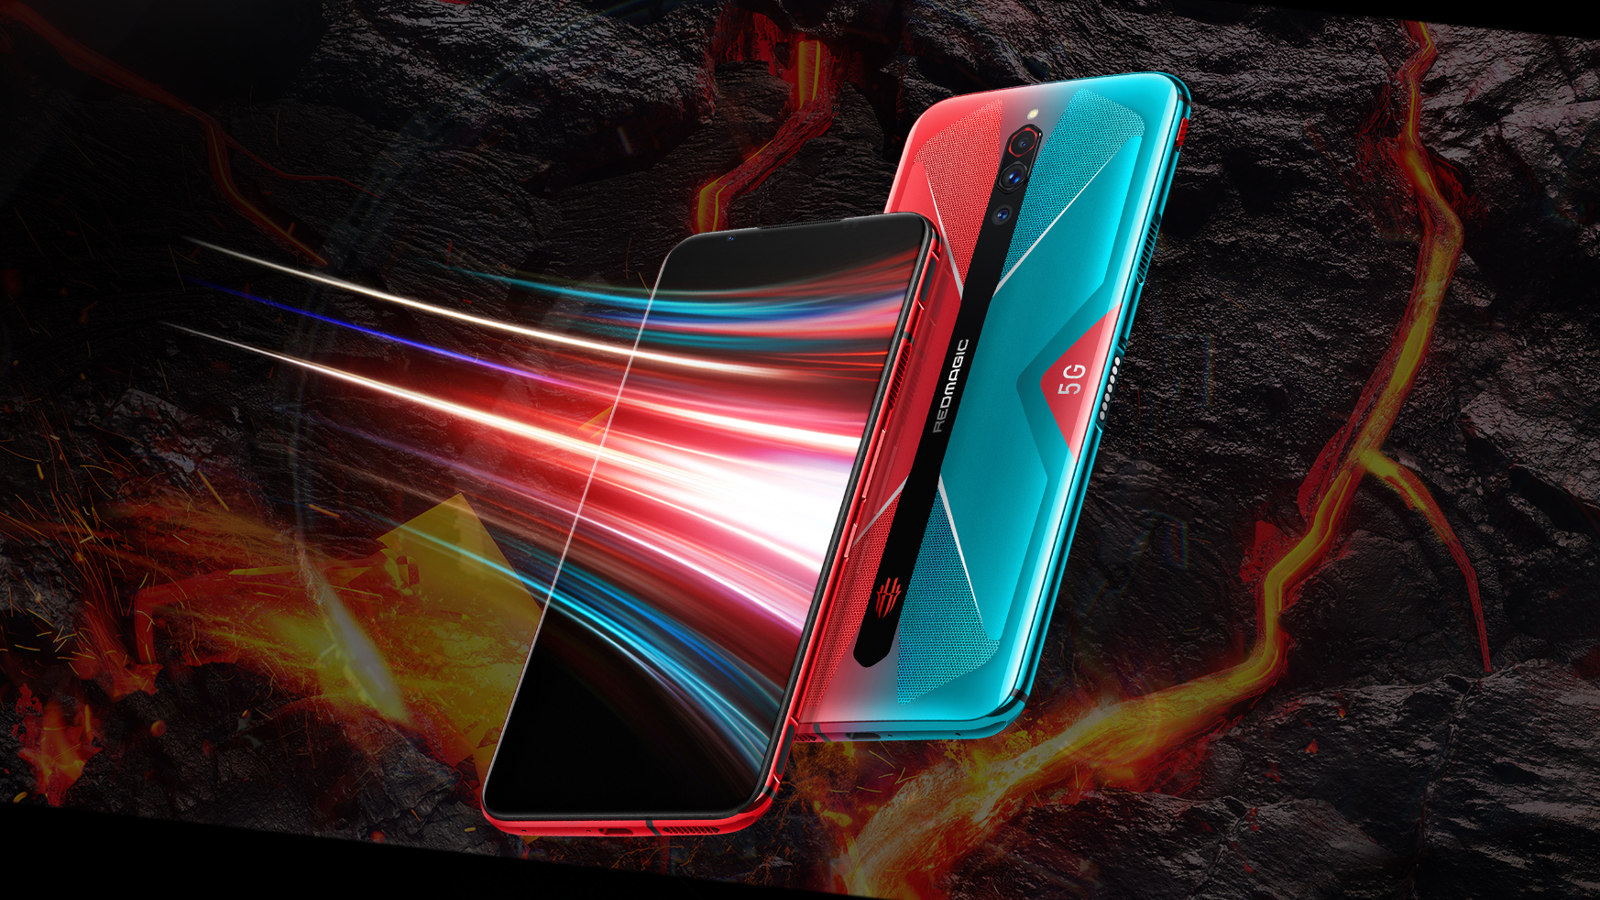 The Nubia Red Magic 5G.